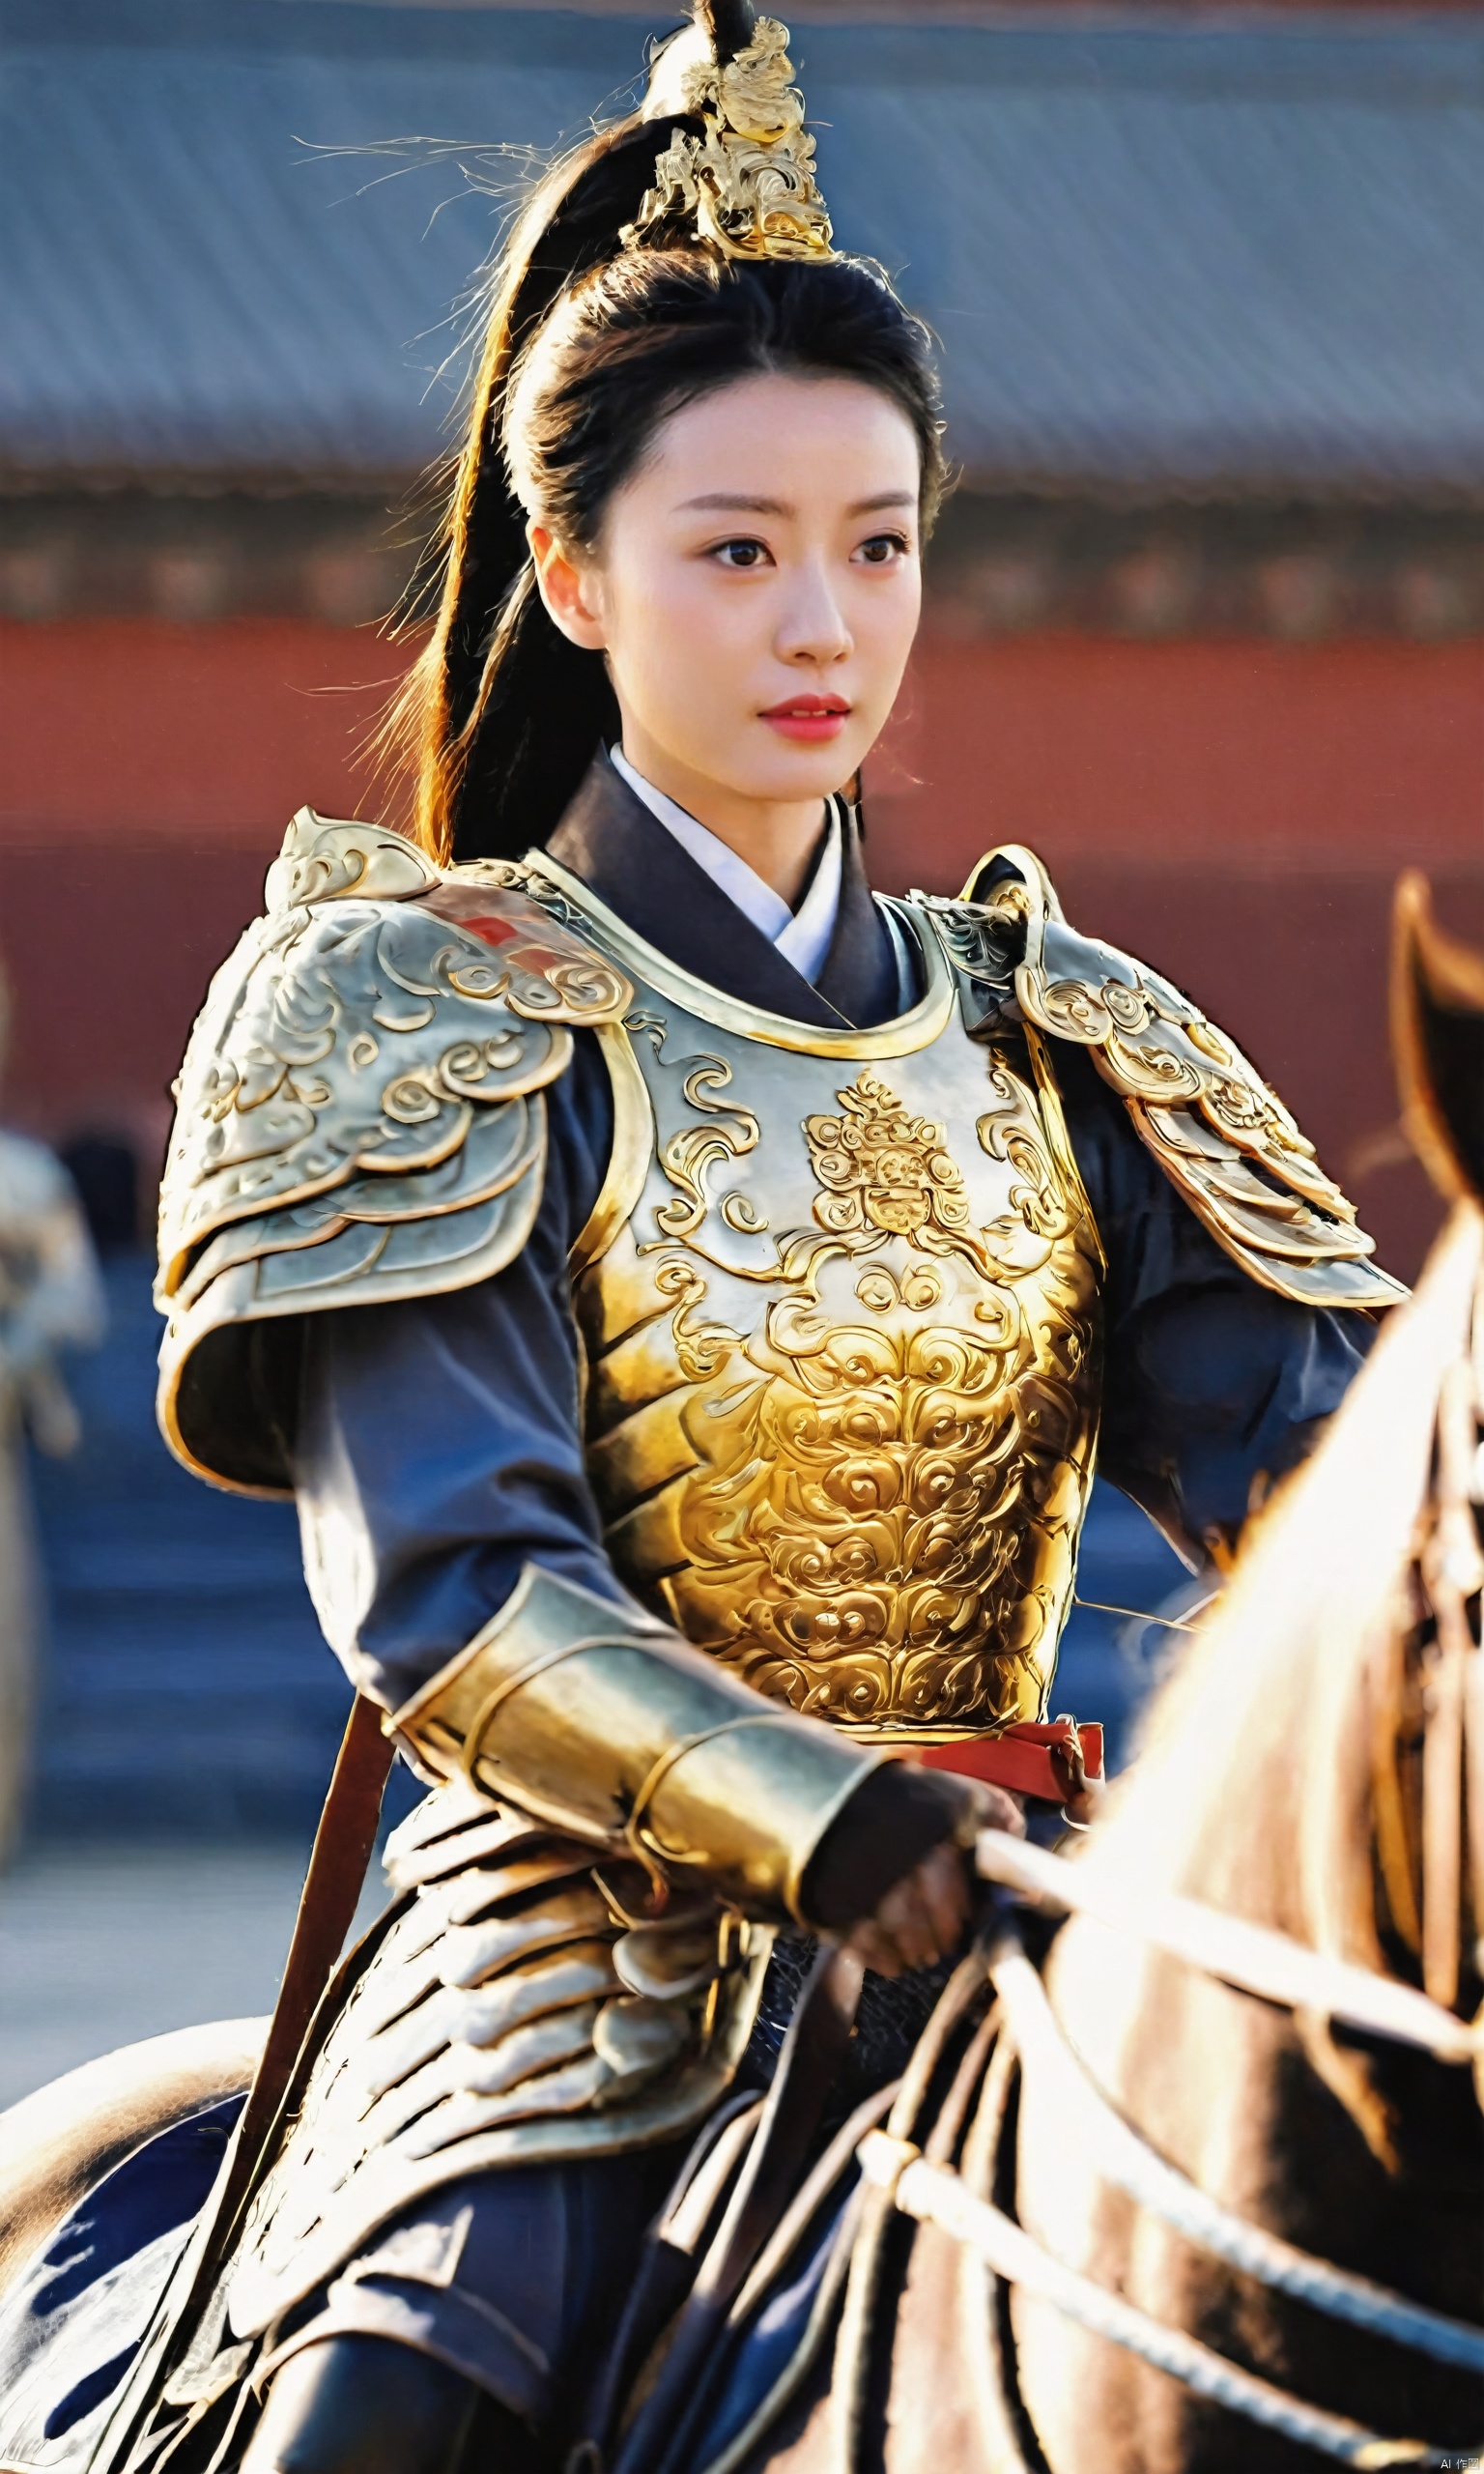  Tang Shuanglong biography, female generals, Tang armor, heavy armor, horseback riding, troops at the city,Cut horse blade,Jin Yong TV series,The Forbidden City